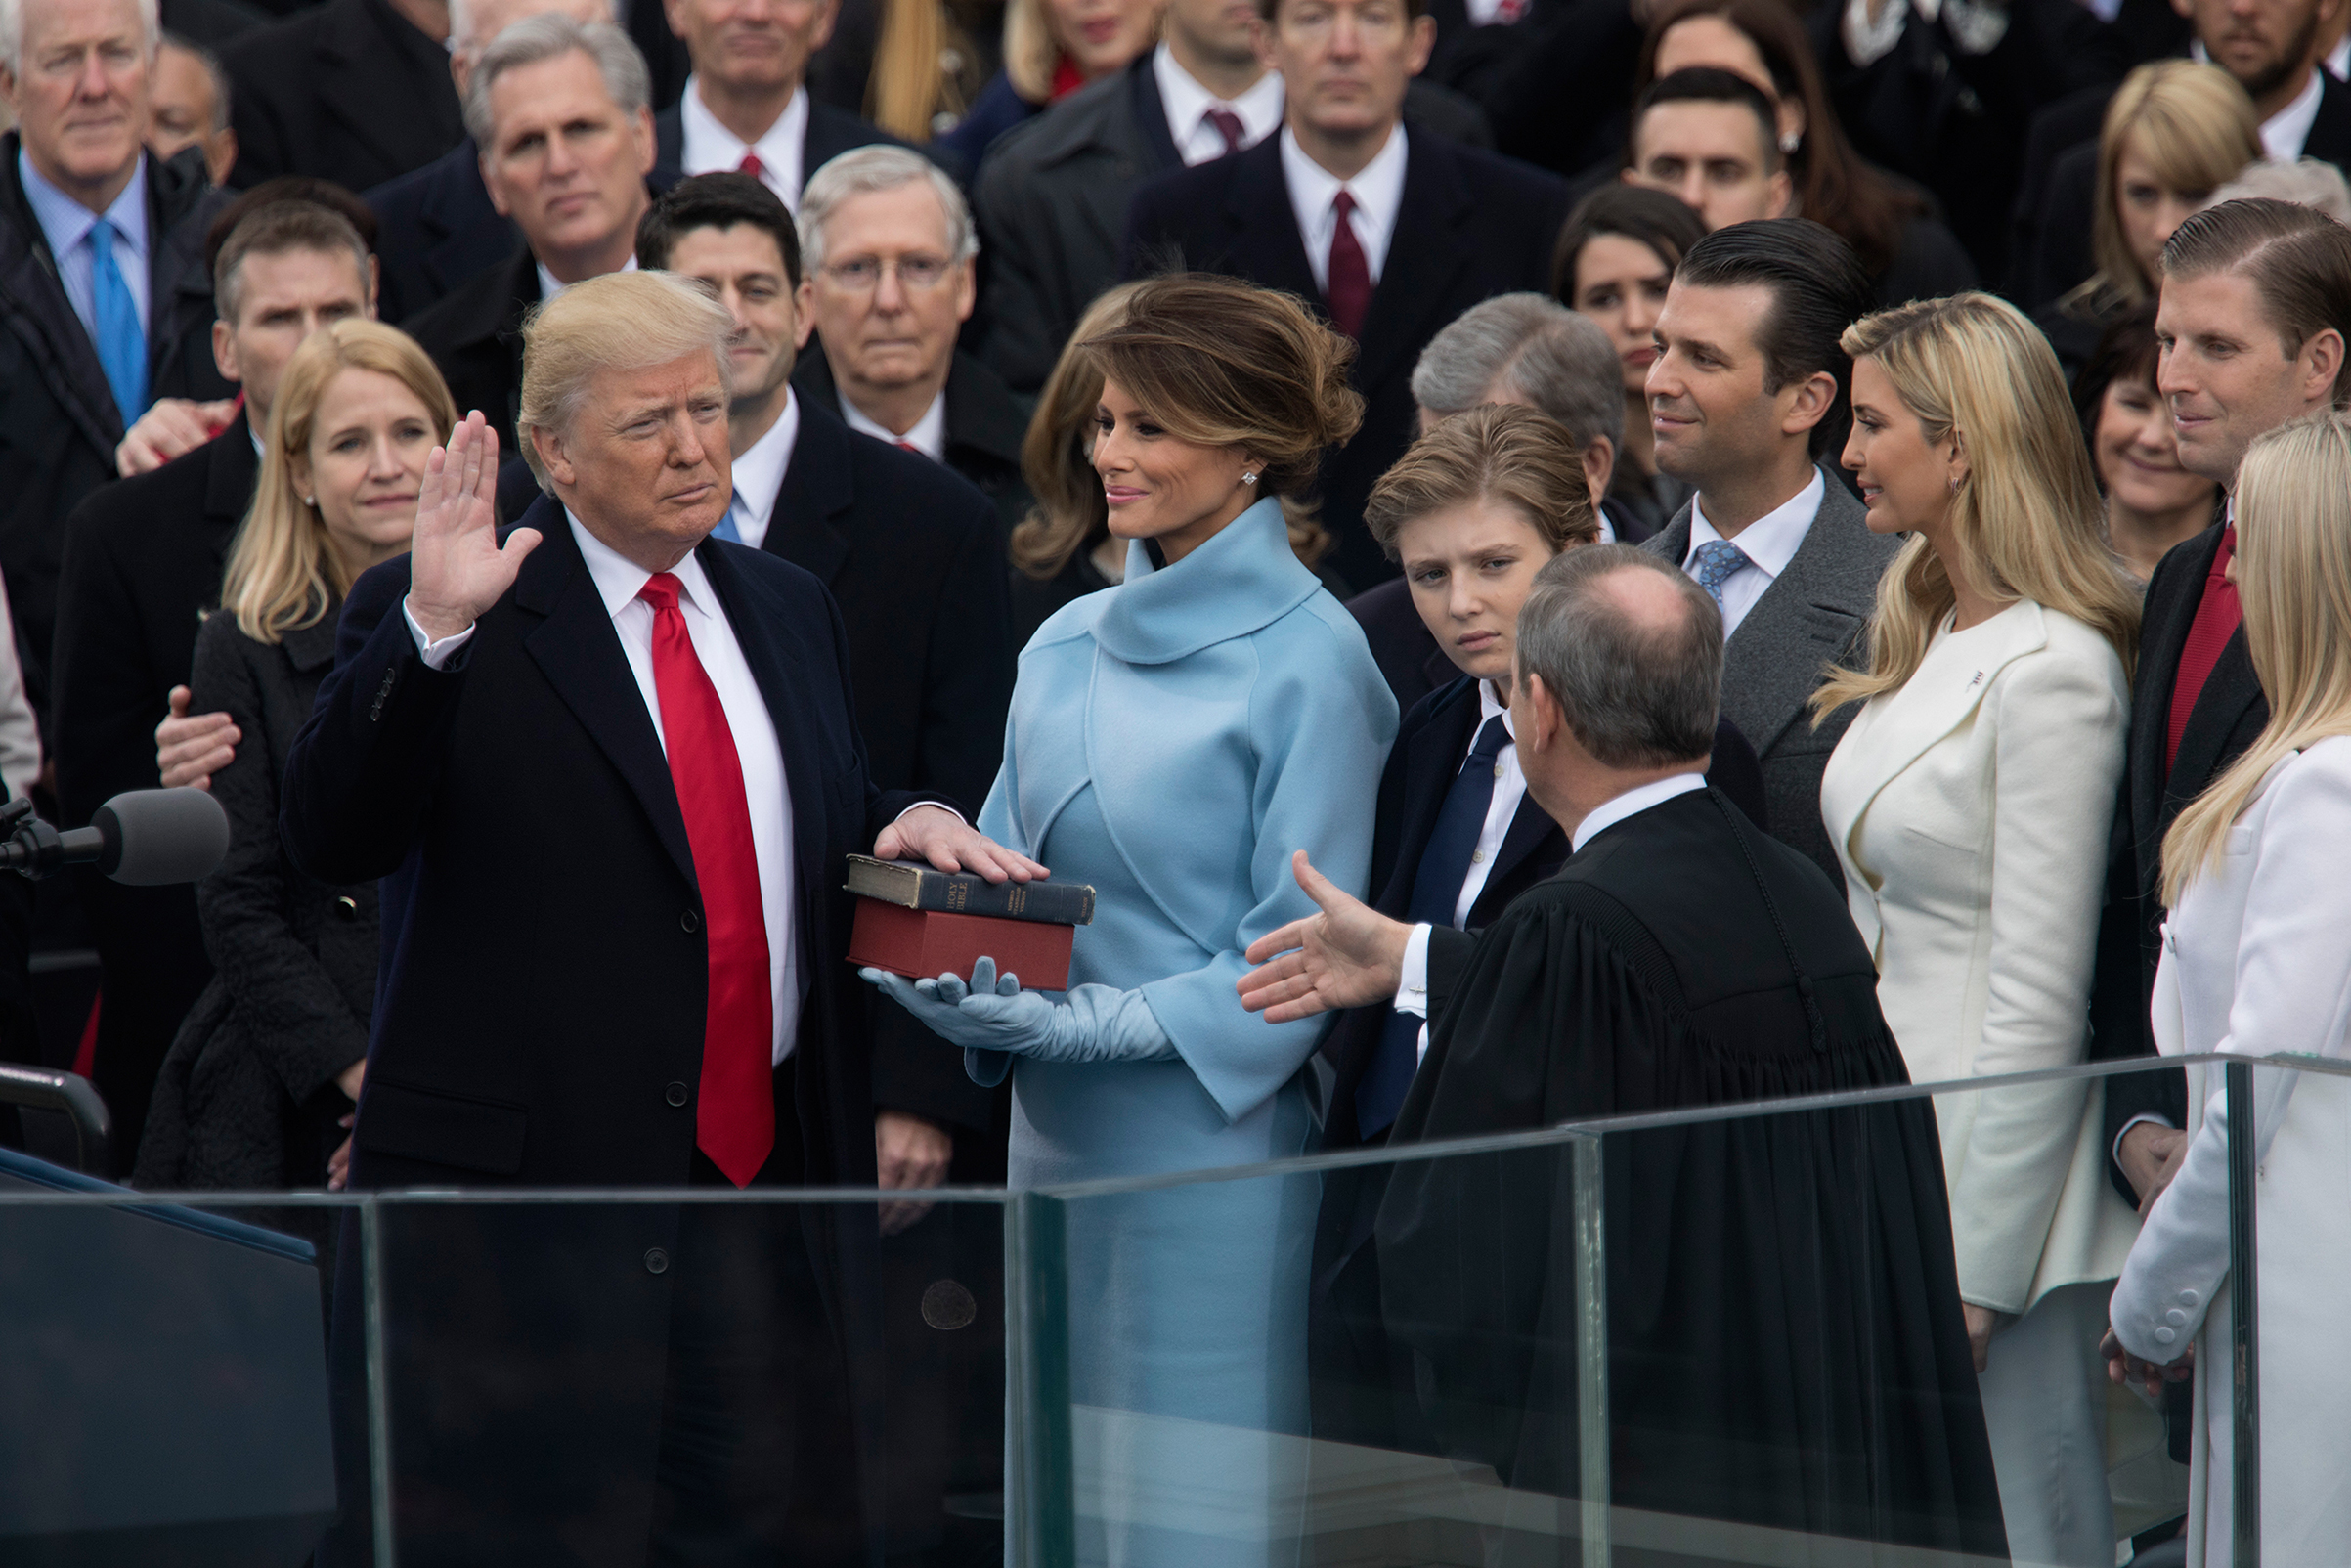 Chief Justice John Roberts administers the oath of office to Trump in 2017. (Christopher Morris) (Christopher Morris)